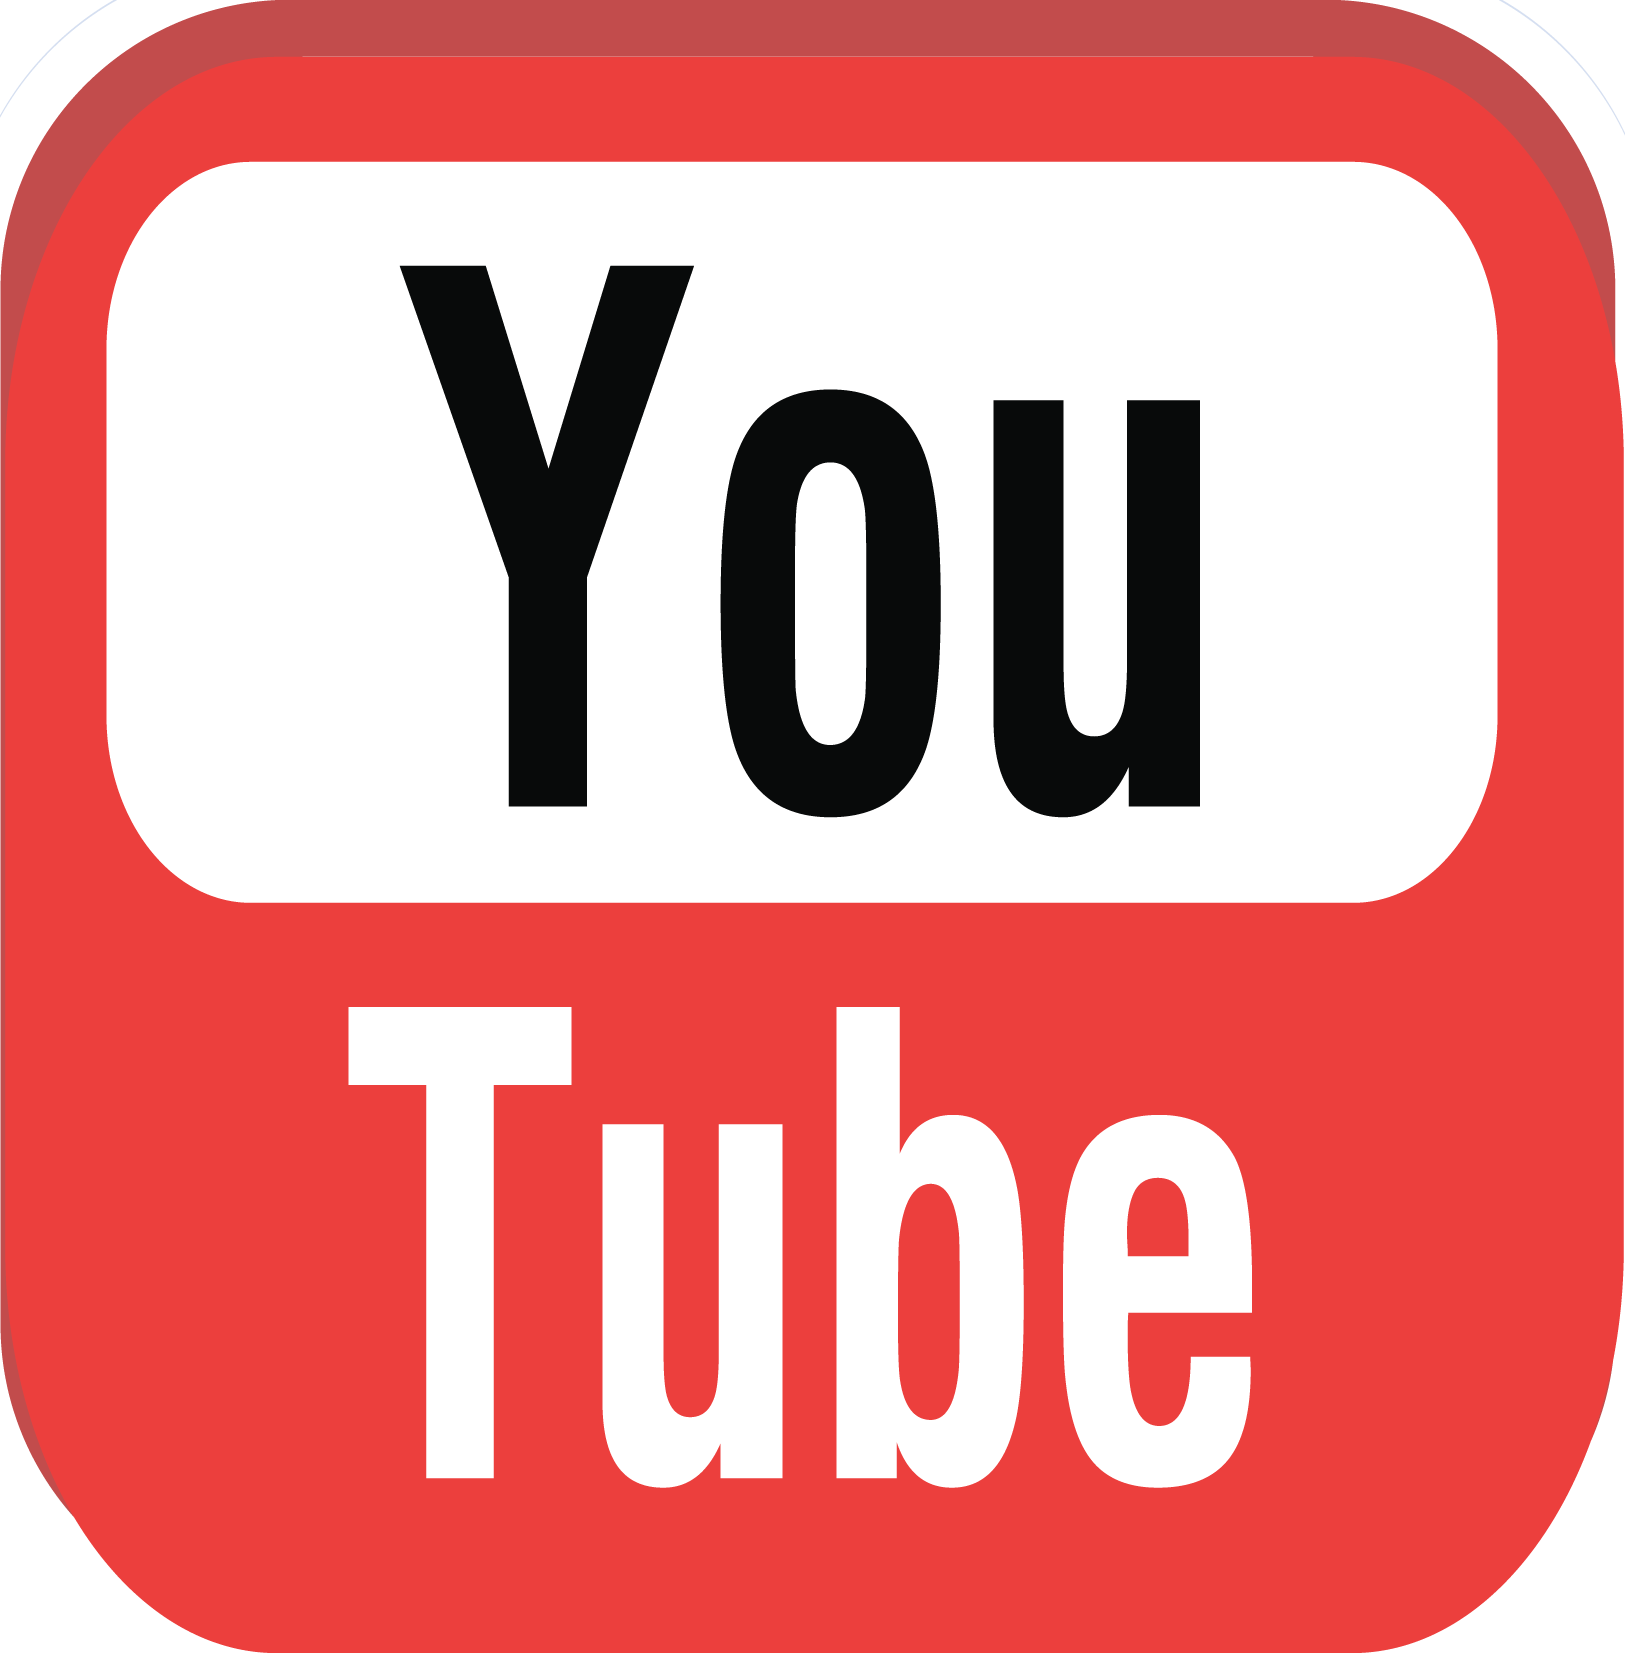 Subscribe to our POLAR-Mohr Channel on Youtube!